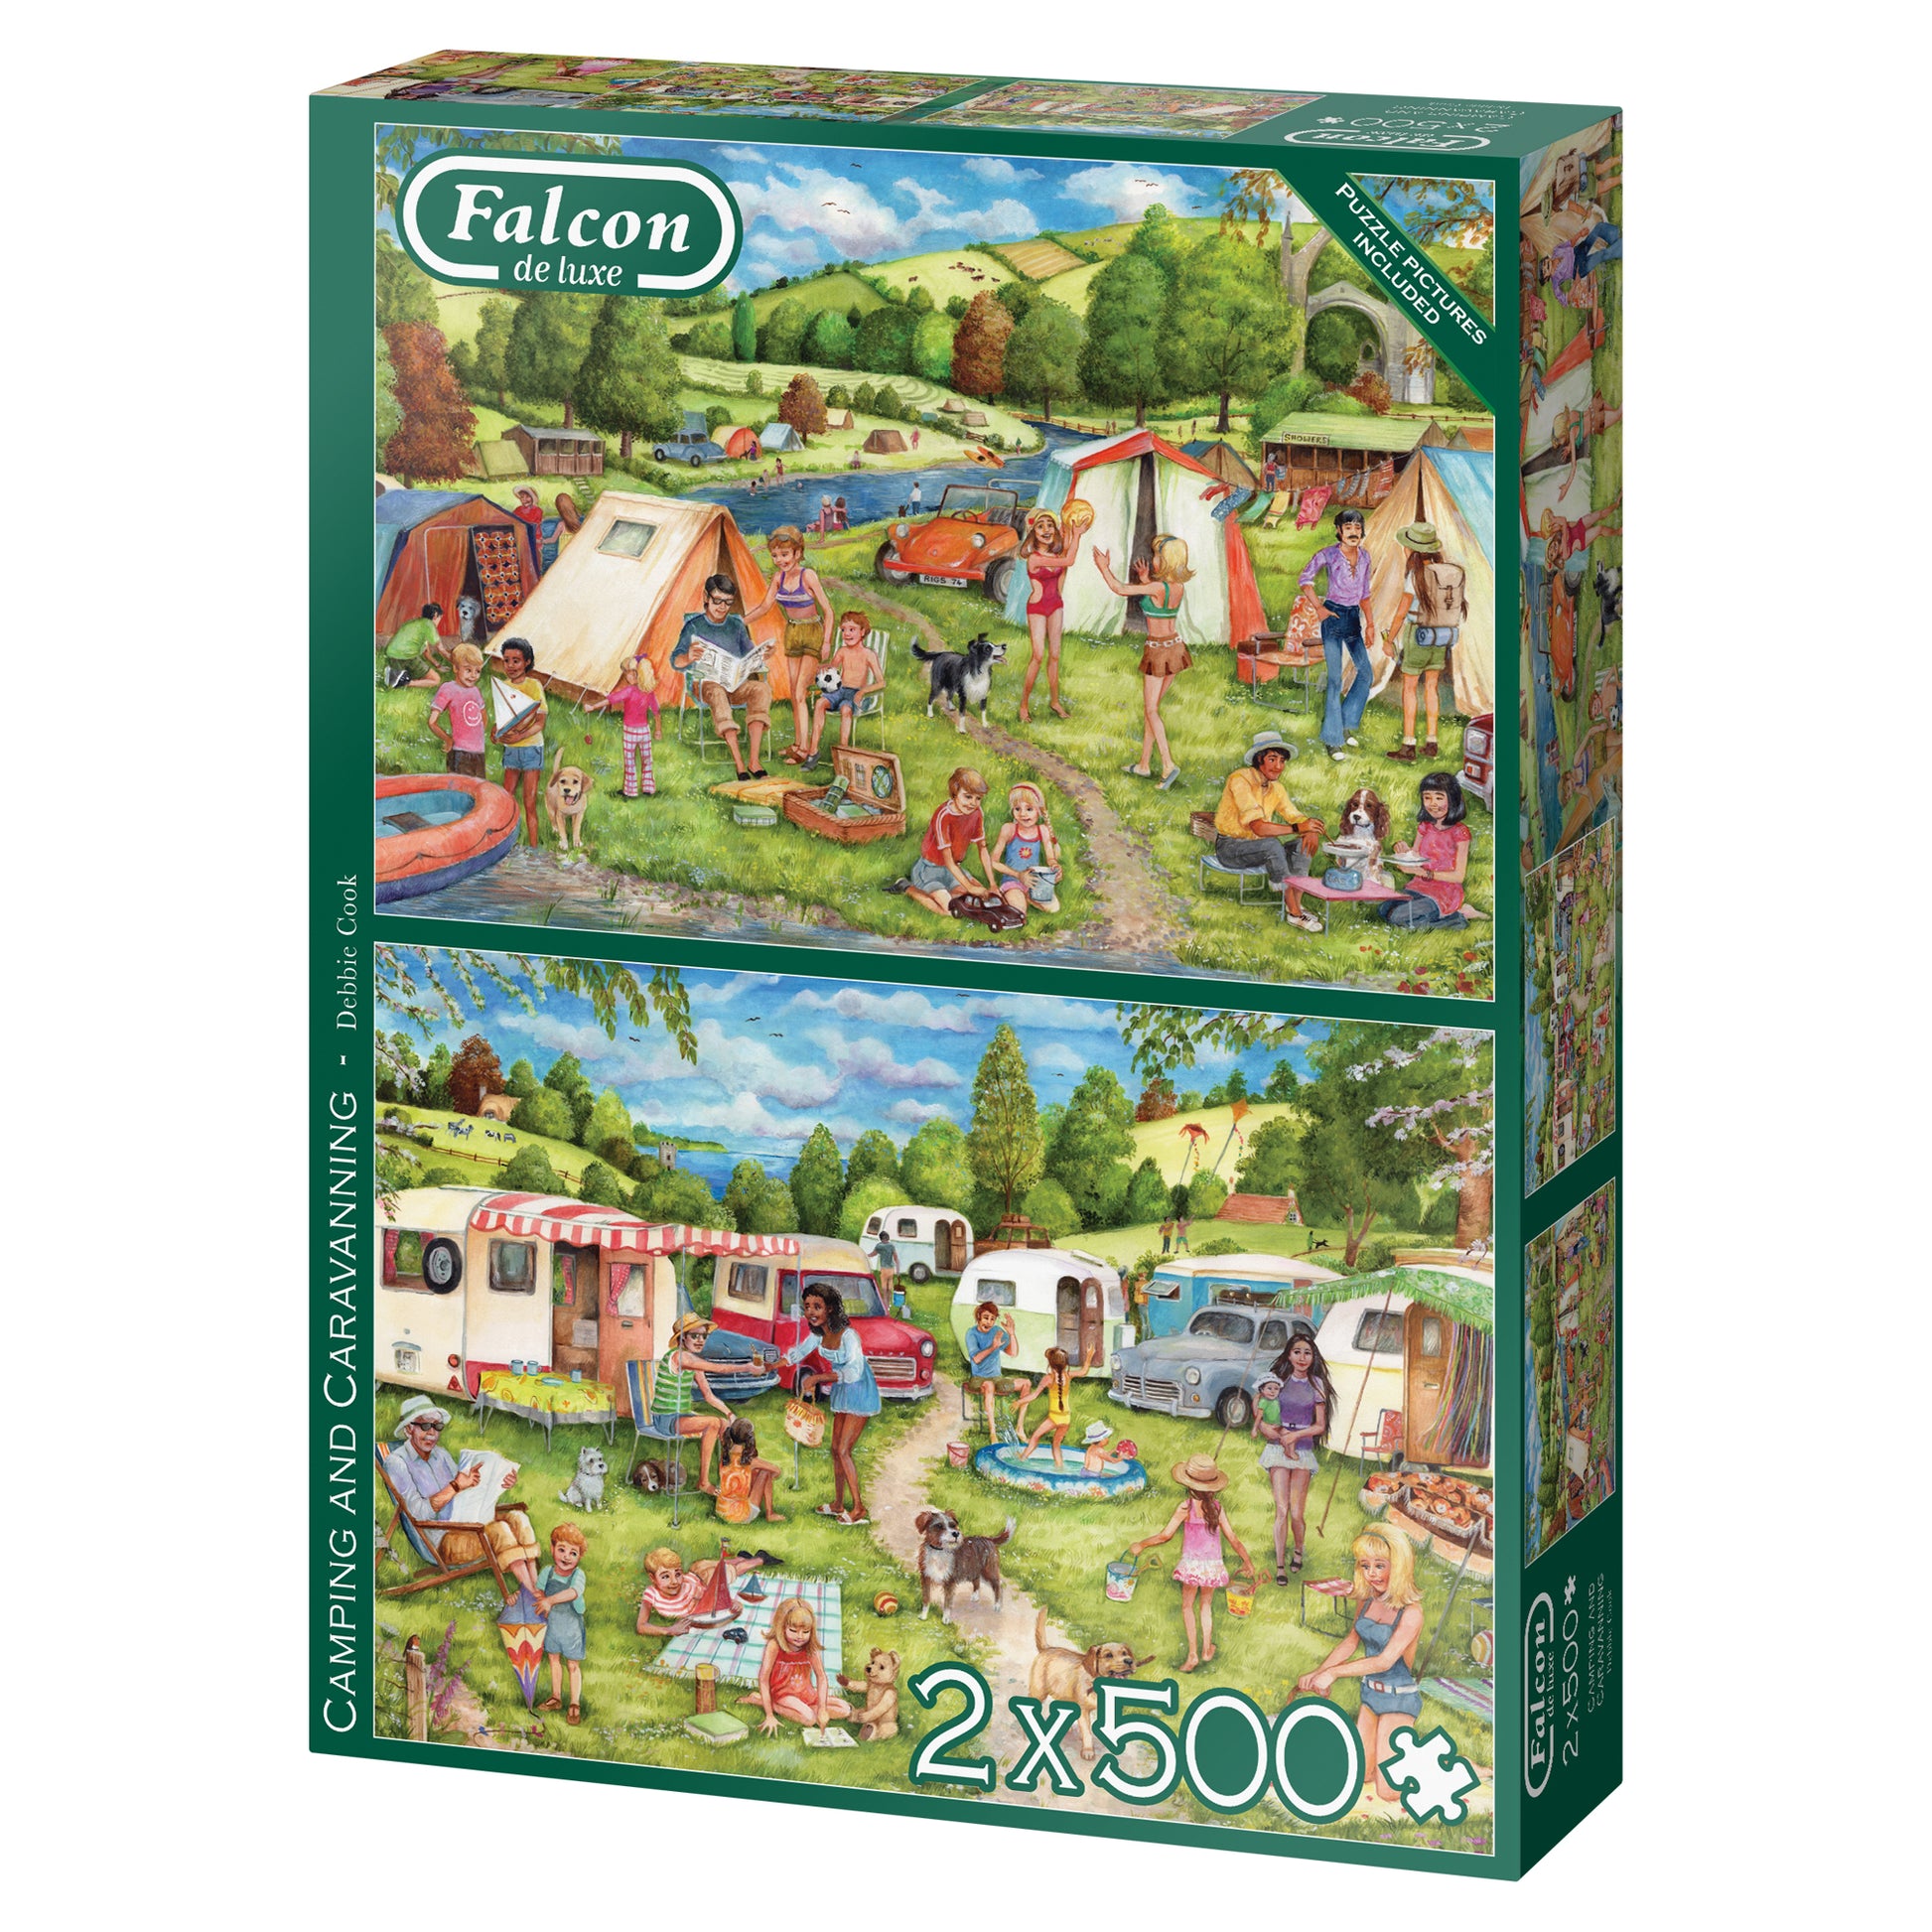 Falcon - Camping and Caravanning (2x500 pieces) - product image - Jumboplay.com